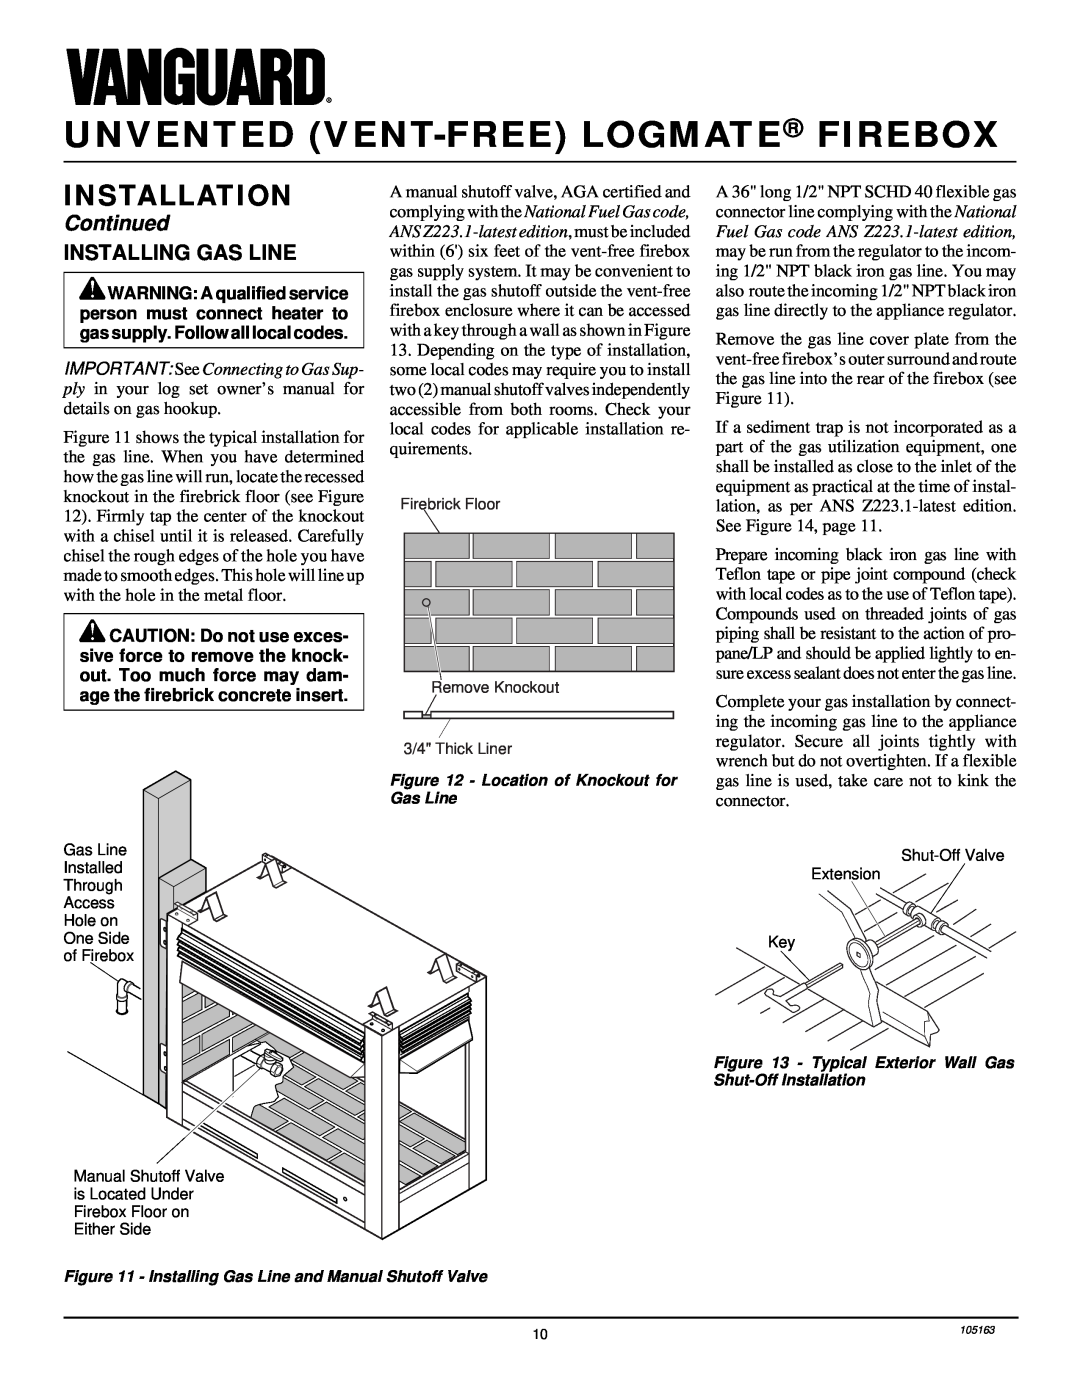 Desa FBPS installation manual Unvented Vent-Freelogmate Firebox, Installation, Continued, Installing Gas Line 